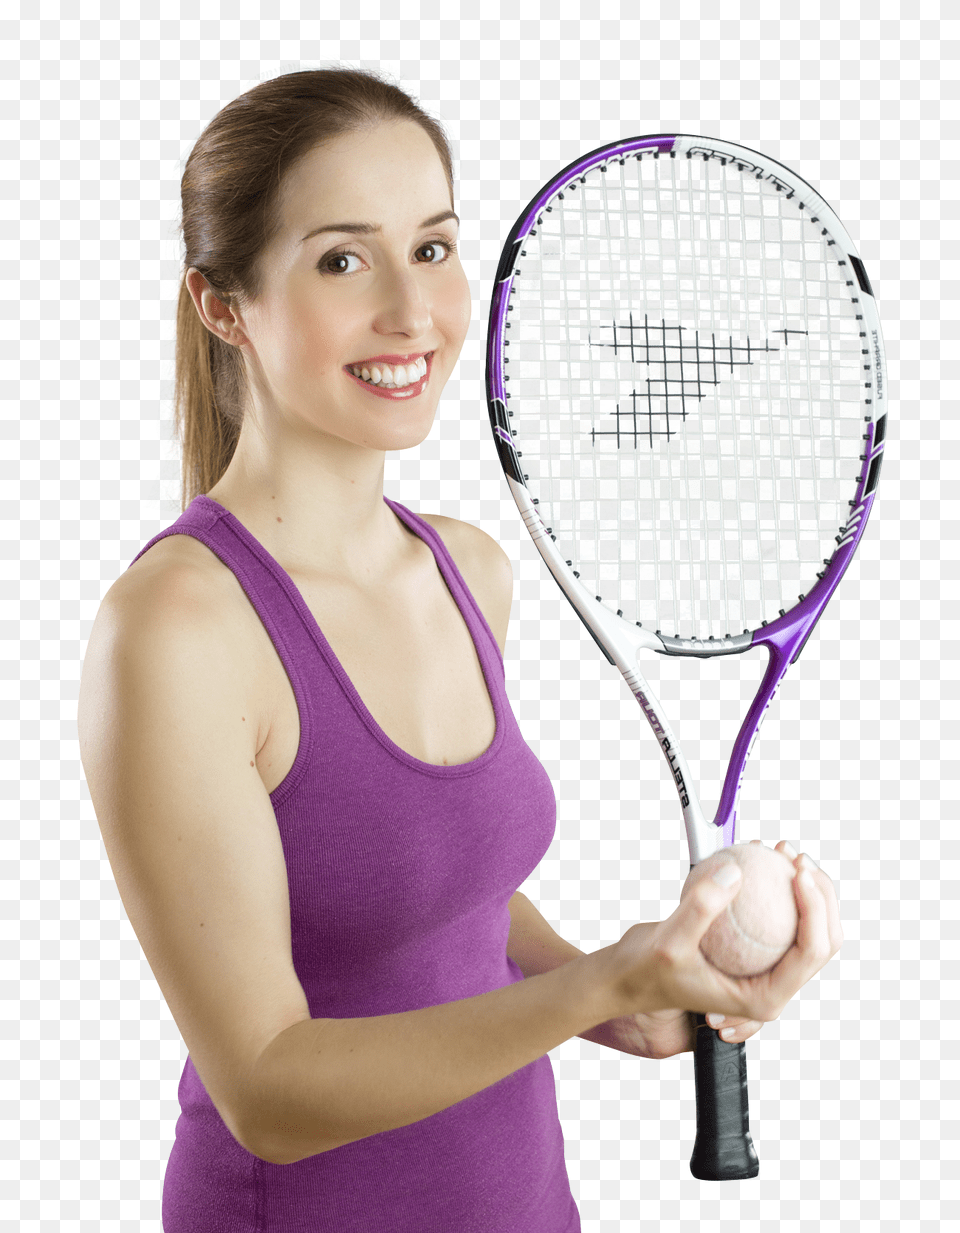 Pngpix Com Smiling Woman With A Tennis Racket Ball, Baseball, Baseball (ball), Tennis Racket Png Image